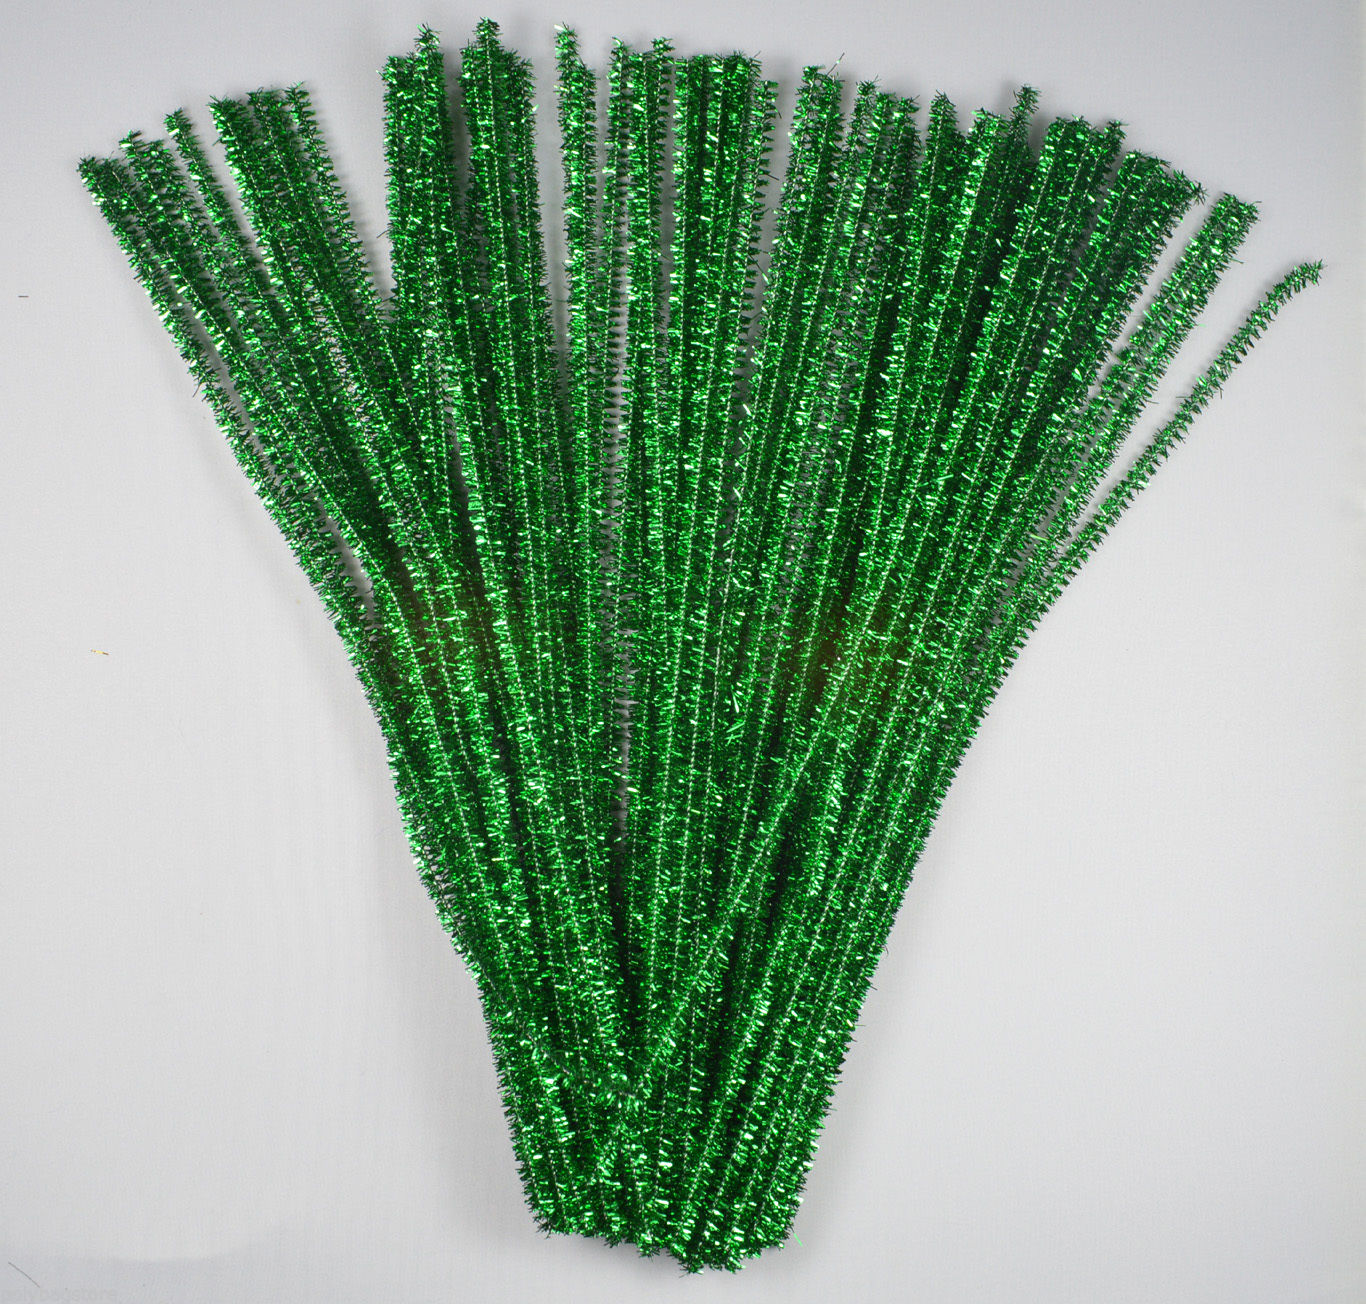 100 - Glitter Green CHENILLE CRAFT STEMS / ARTS & CRAFTS / PIPE CLEANERS /  30cm / 12